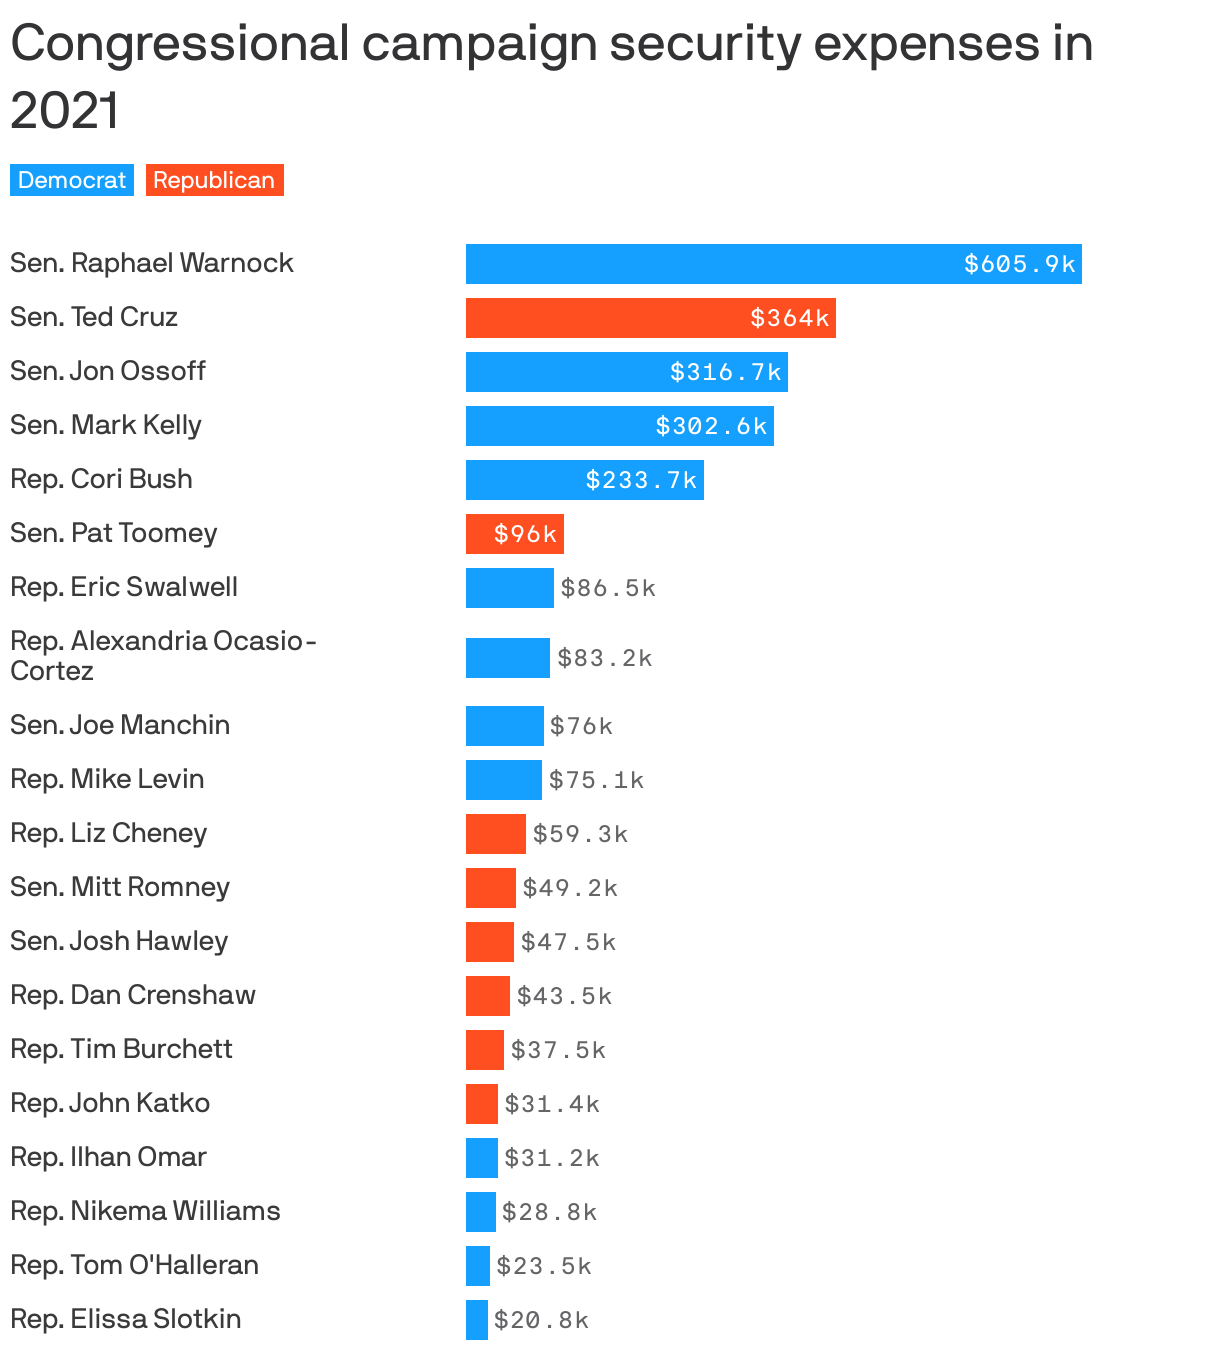 Congressional campaign security expenses in 2021